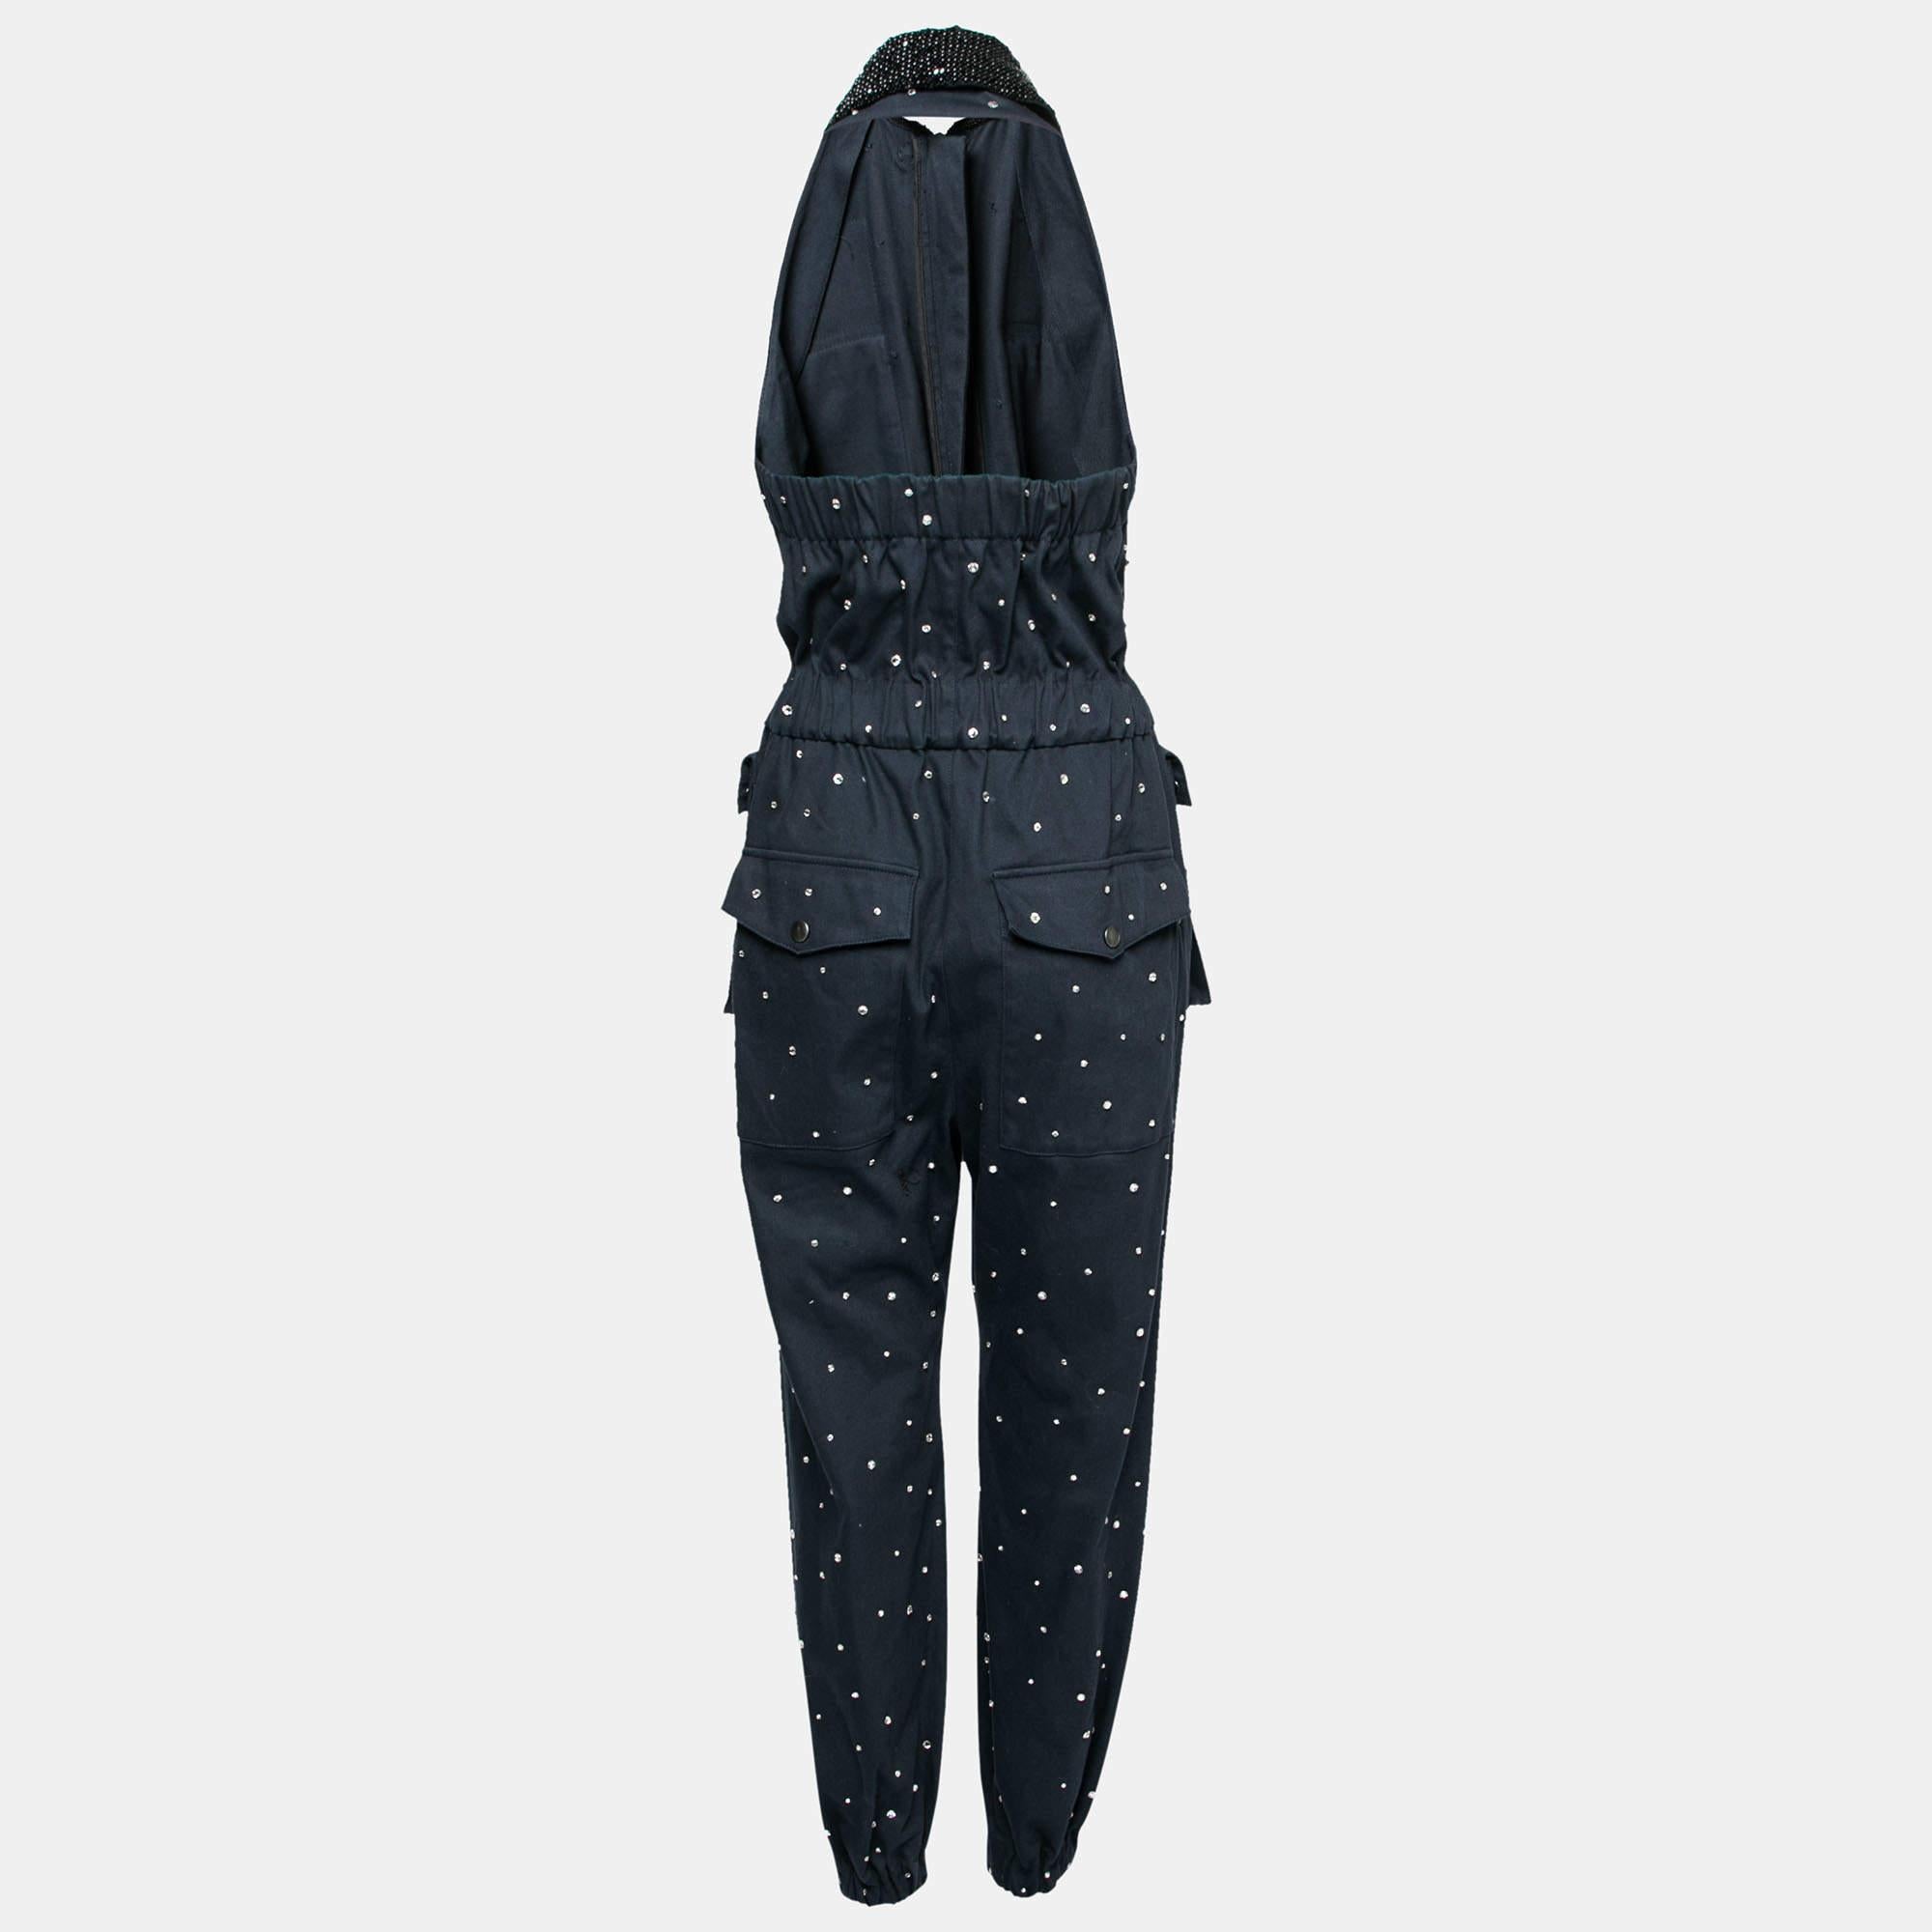 This Miu Miu jumpsuit will be an elegant addition to your closet. Crafted skillfully from cotton and featuring embellishments and bead embroidery, the halter neck creation has a navy blue shade that will match well with minimal accessories. It is